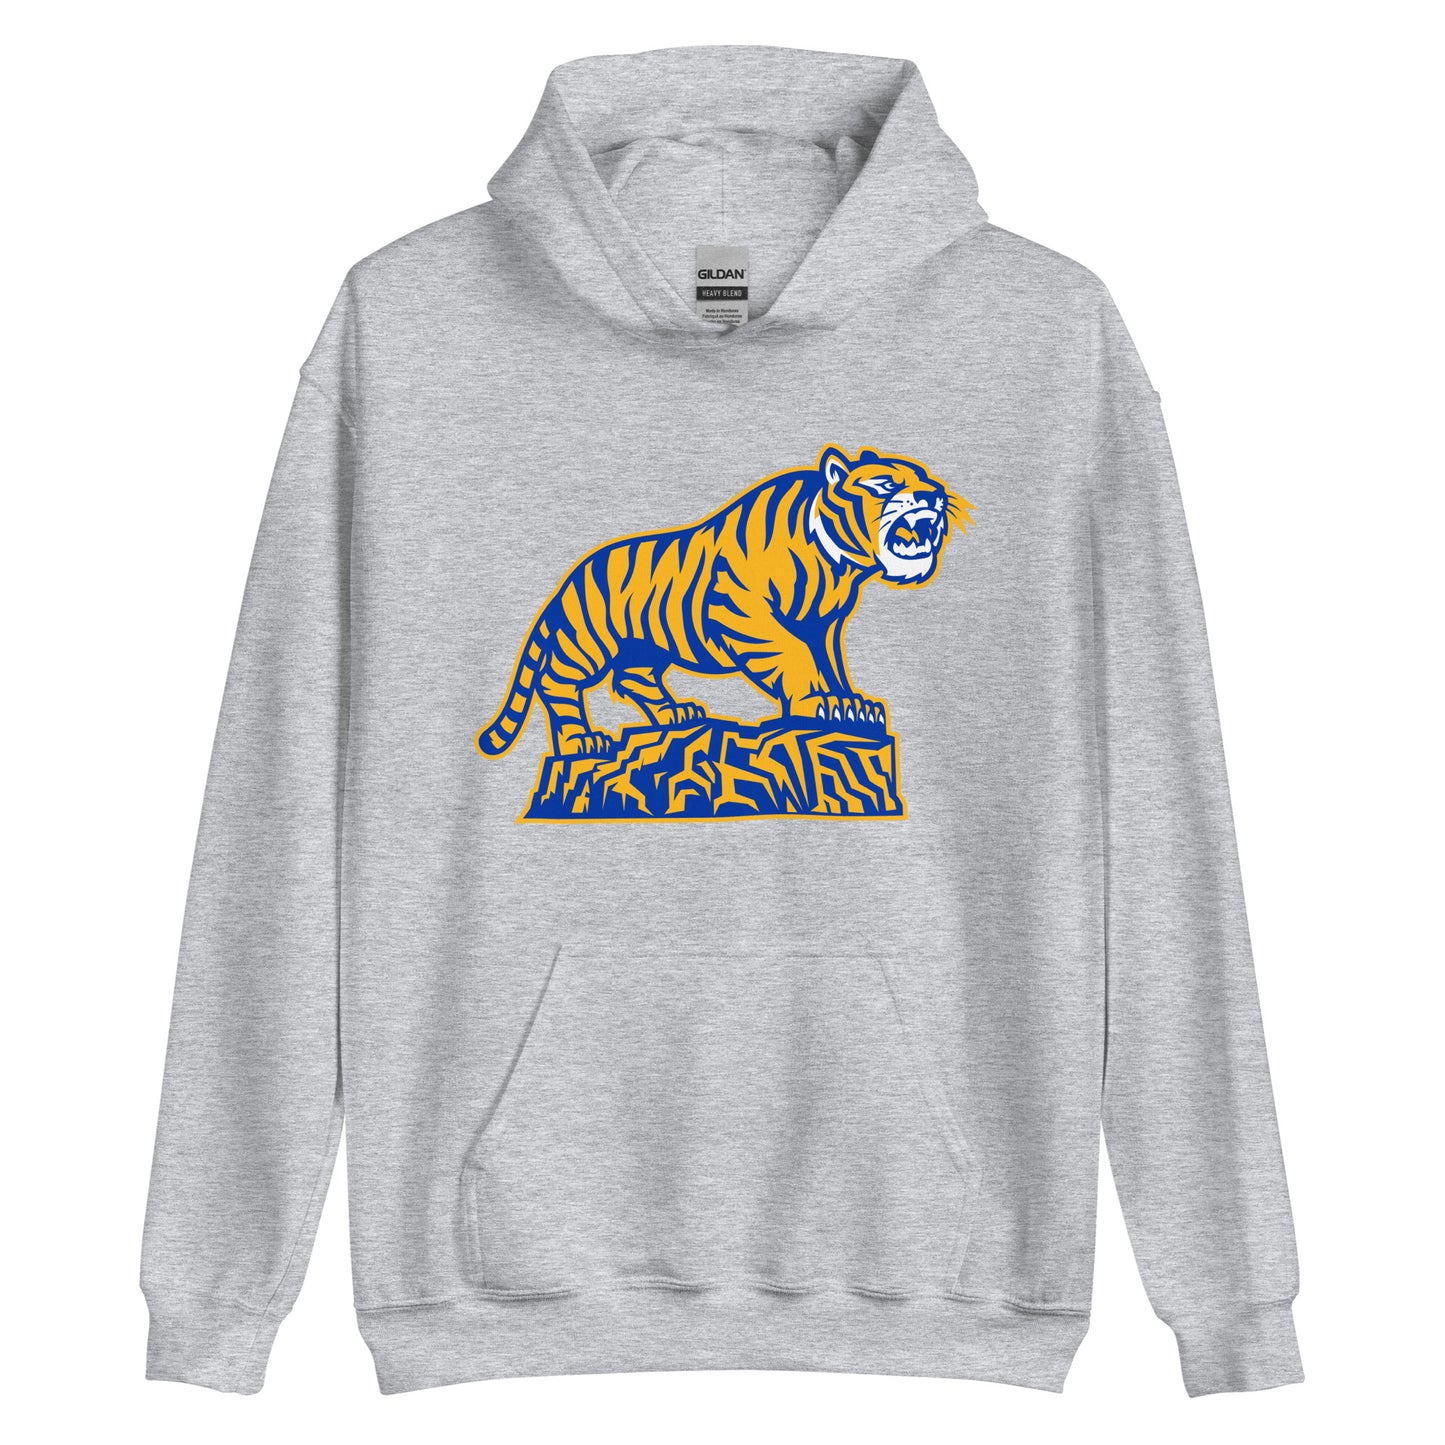 Lincoln Middle School Tiger Hoodie